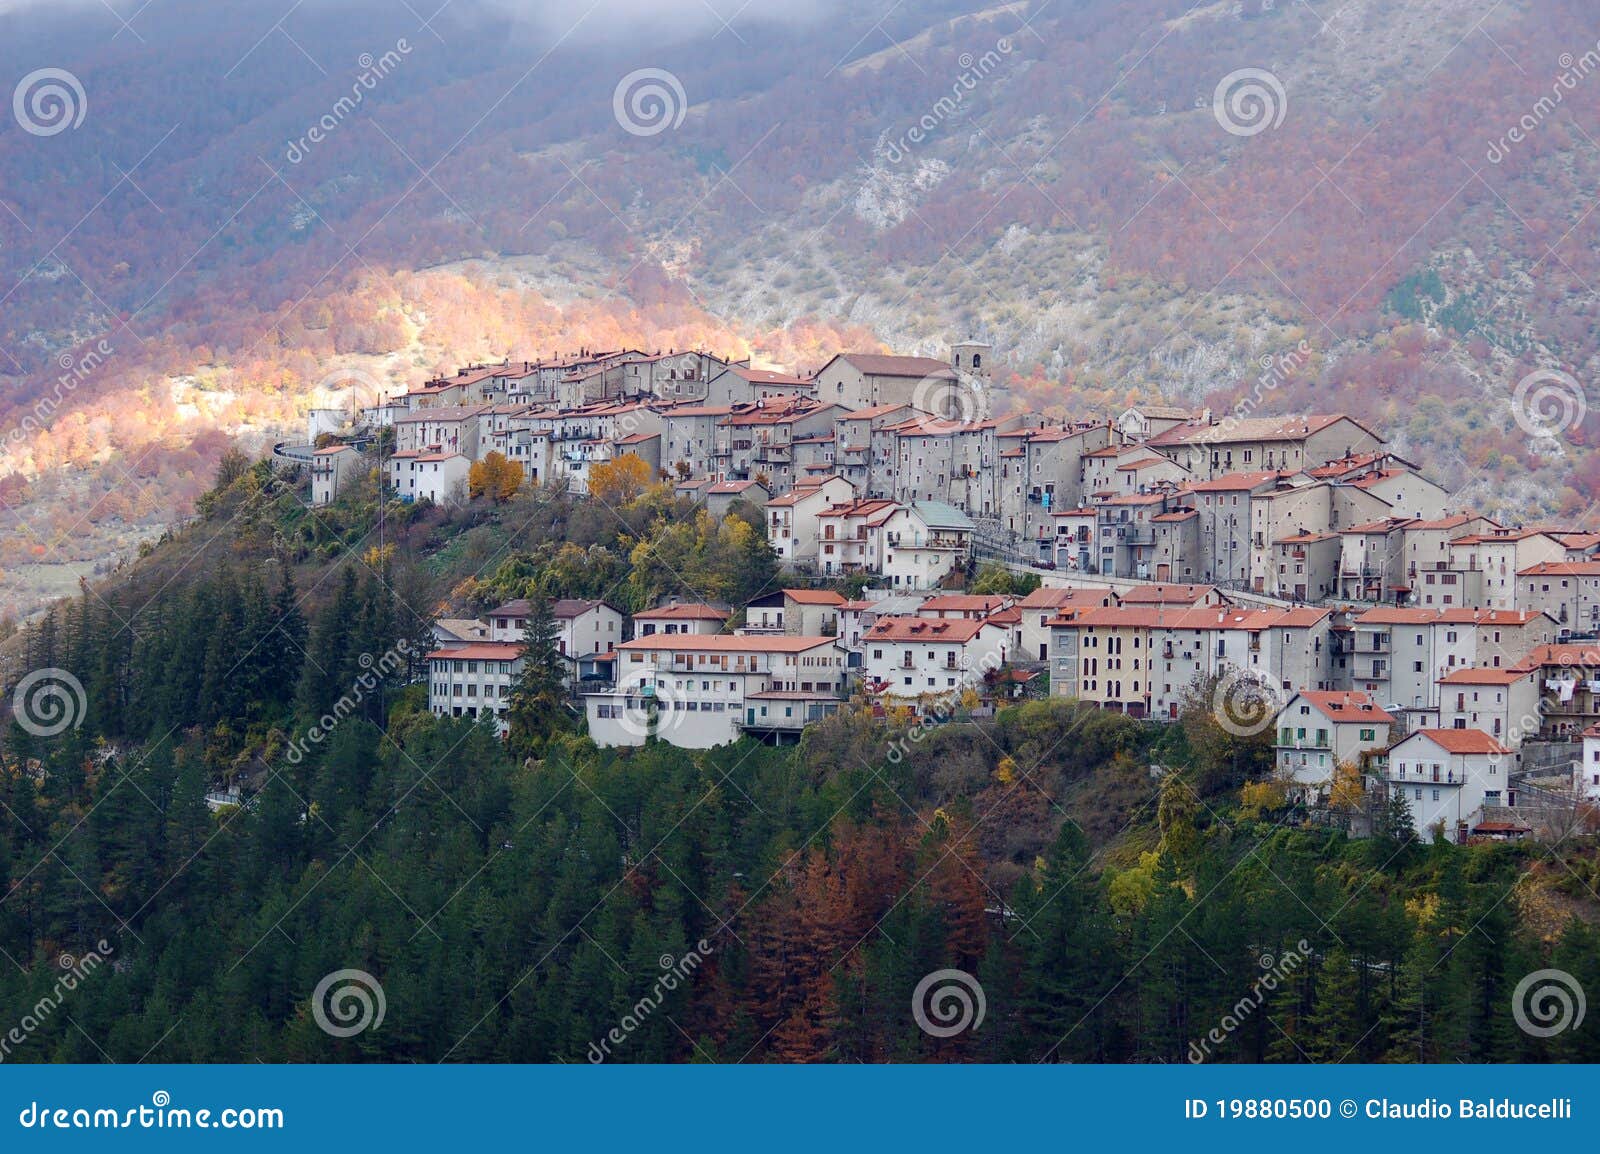 old village of opi in abruzzo